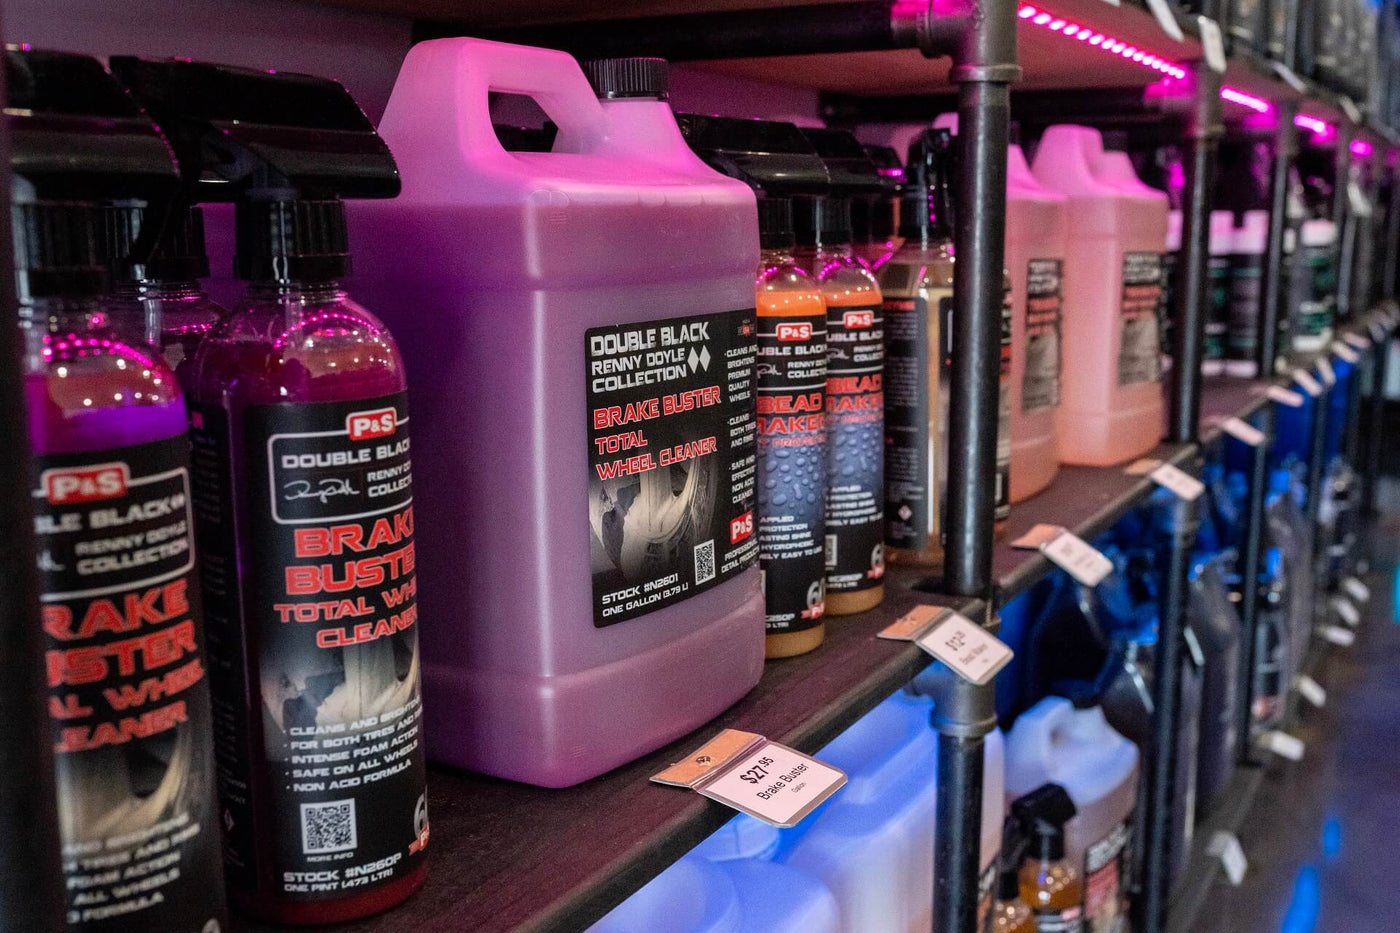 Auto Detailing Supplies Store, Car Care Products